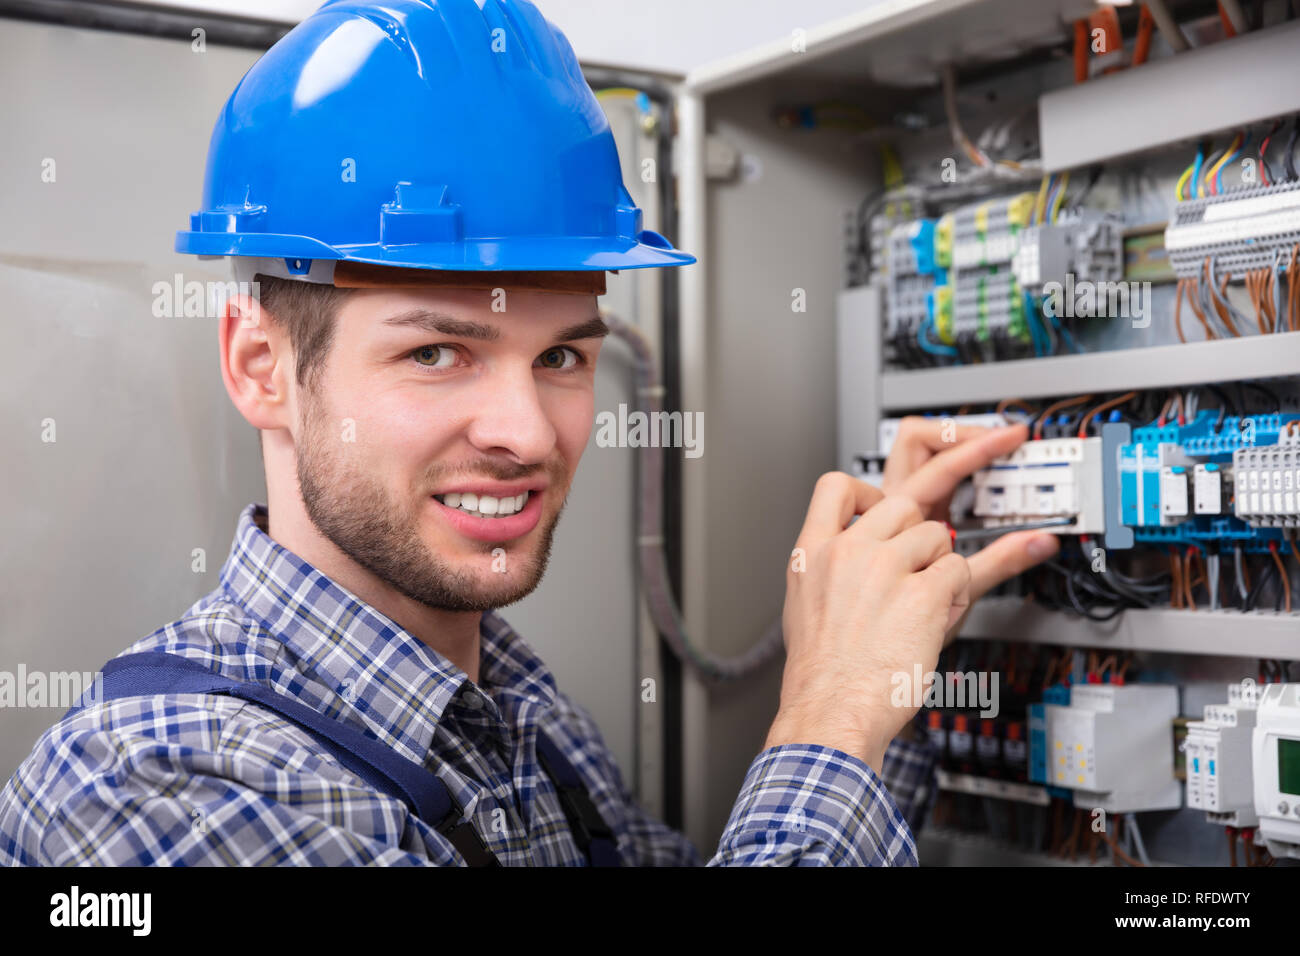 Side View Of Young Technician Repairing Fuse Box With Screwdriver Stock Photo